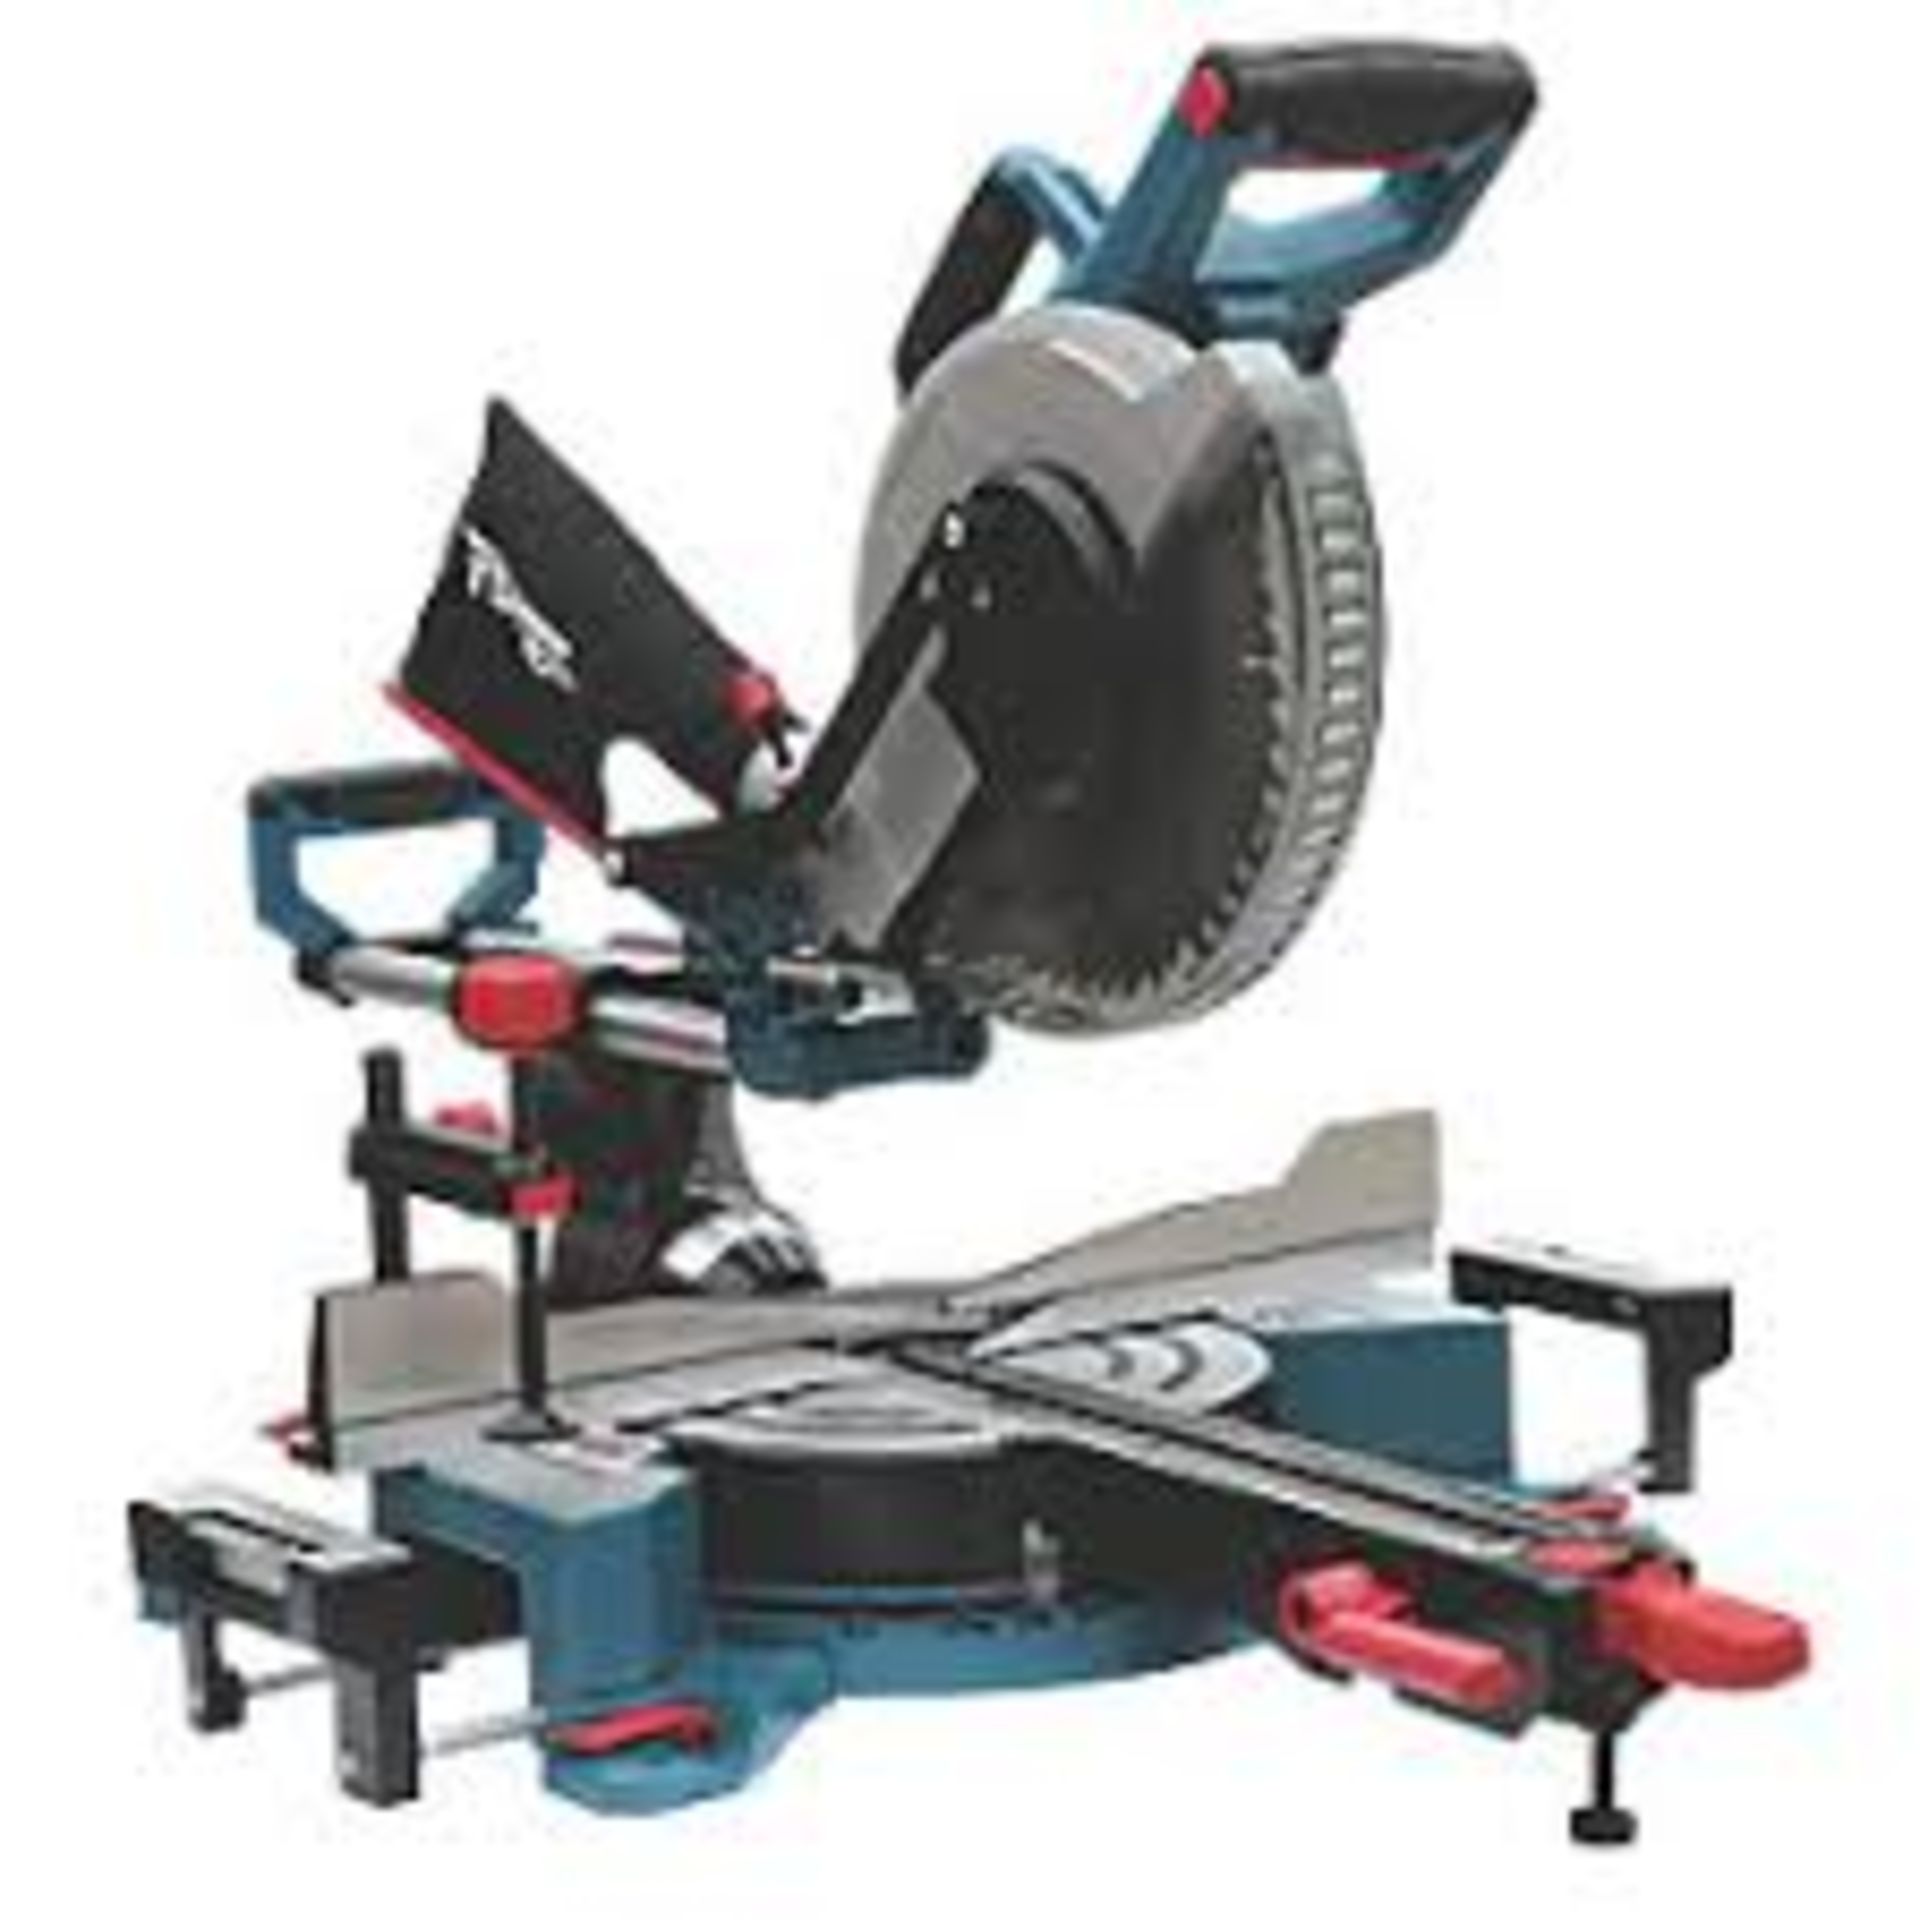 Erbauer EMIS254S 254mm Electric Double-Bevel Sliding Mitre Saw. - ER45. Double-bevel sliding mitre